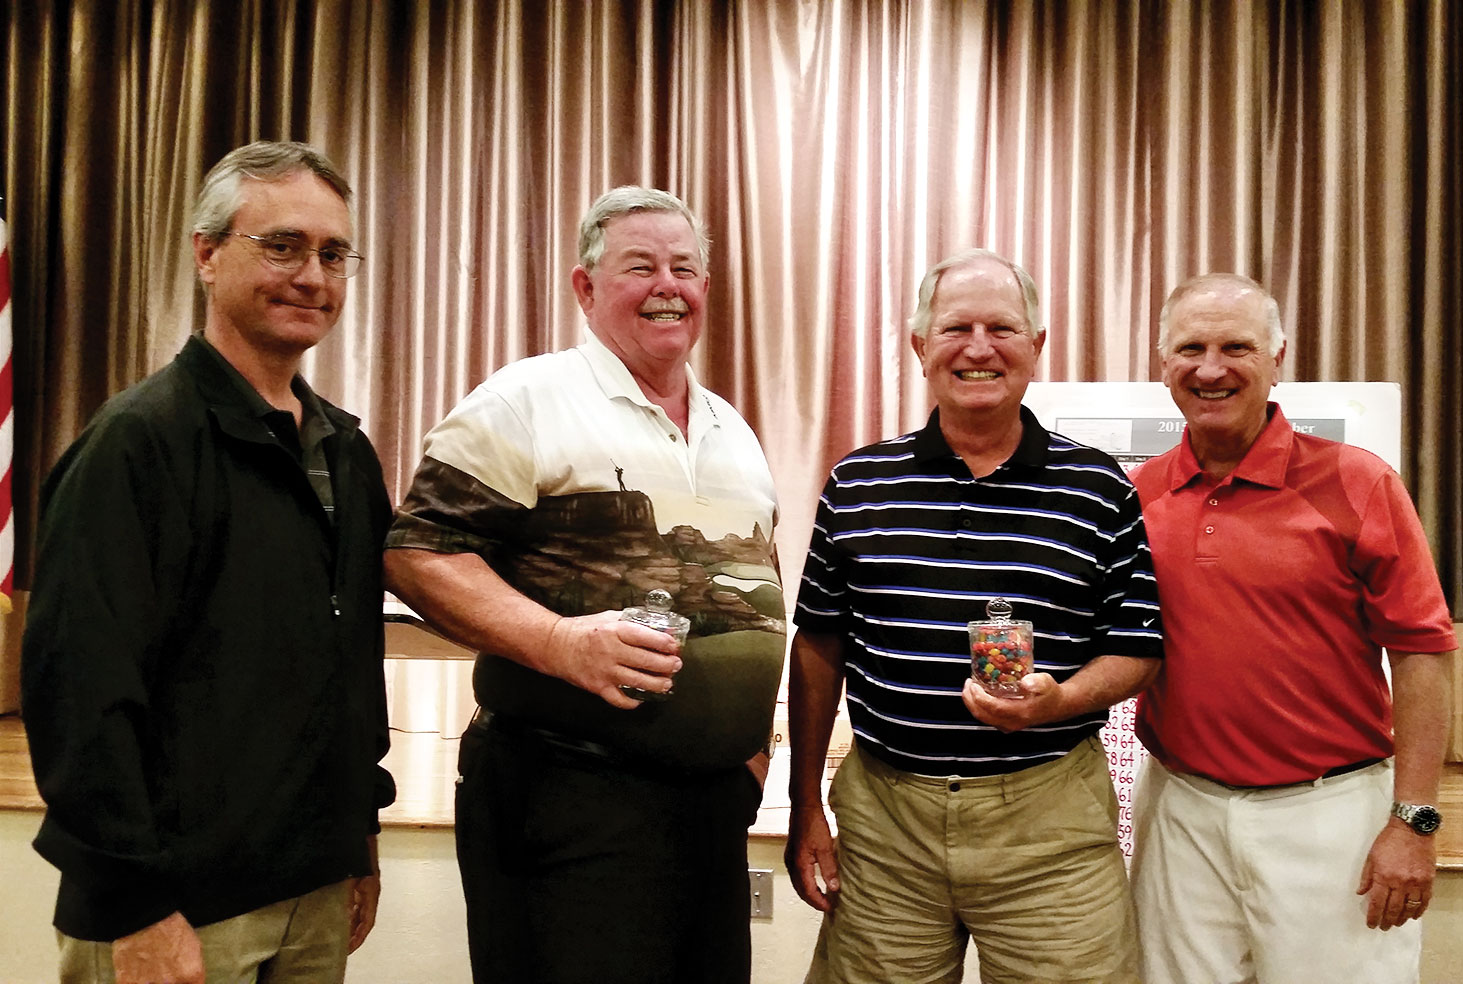 Pictured (left to right) Mike Jahaske, winners Frank McHugh and Steve Bender, and Dennis Marchand.